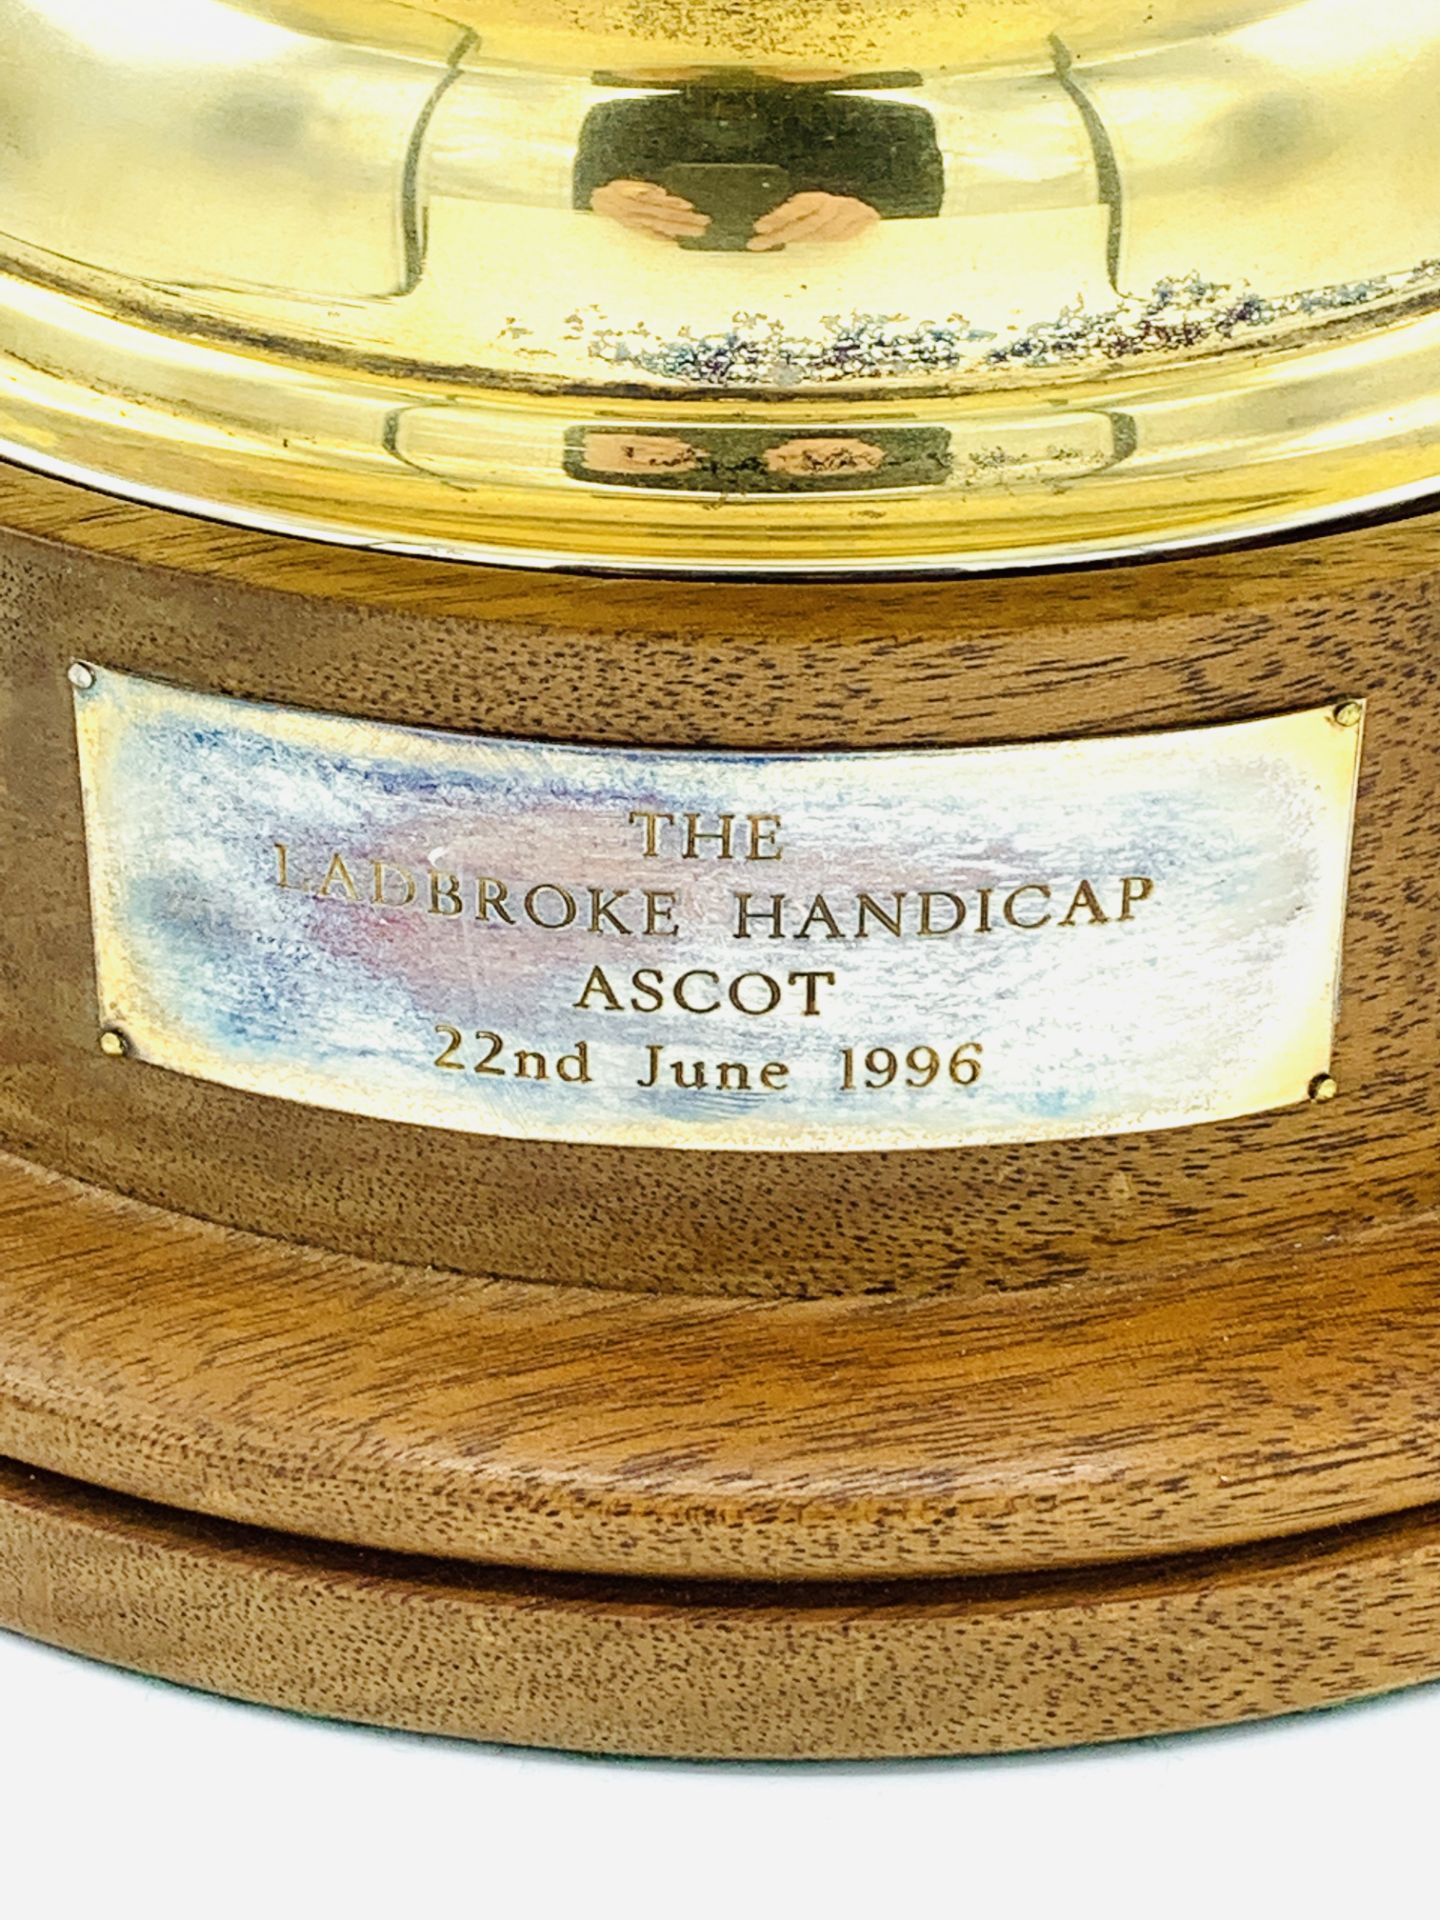 A gilded silver plate bowl, on plinth inscribed "The Ladbroke Handicap, Ascot, 22nd June 1996" - Image 3 of 4